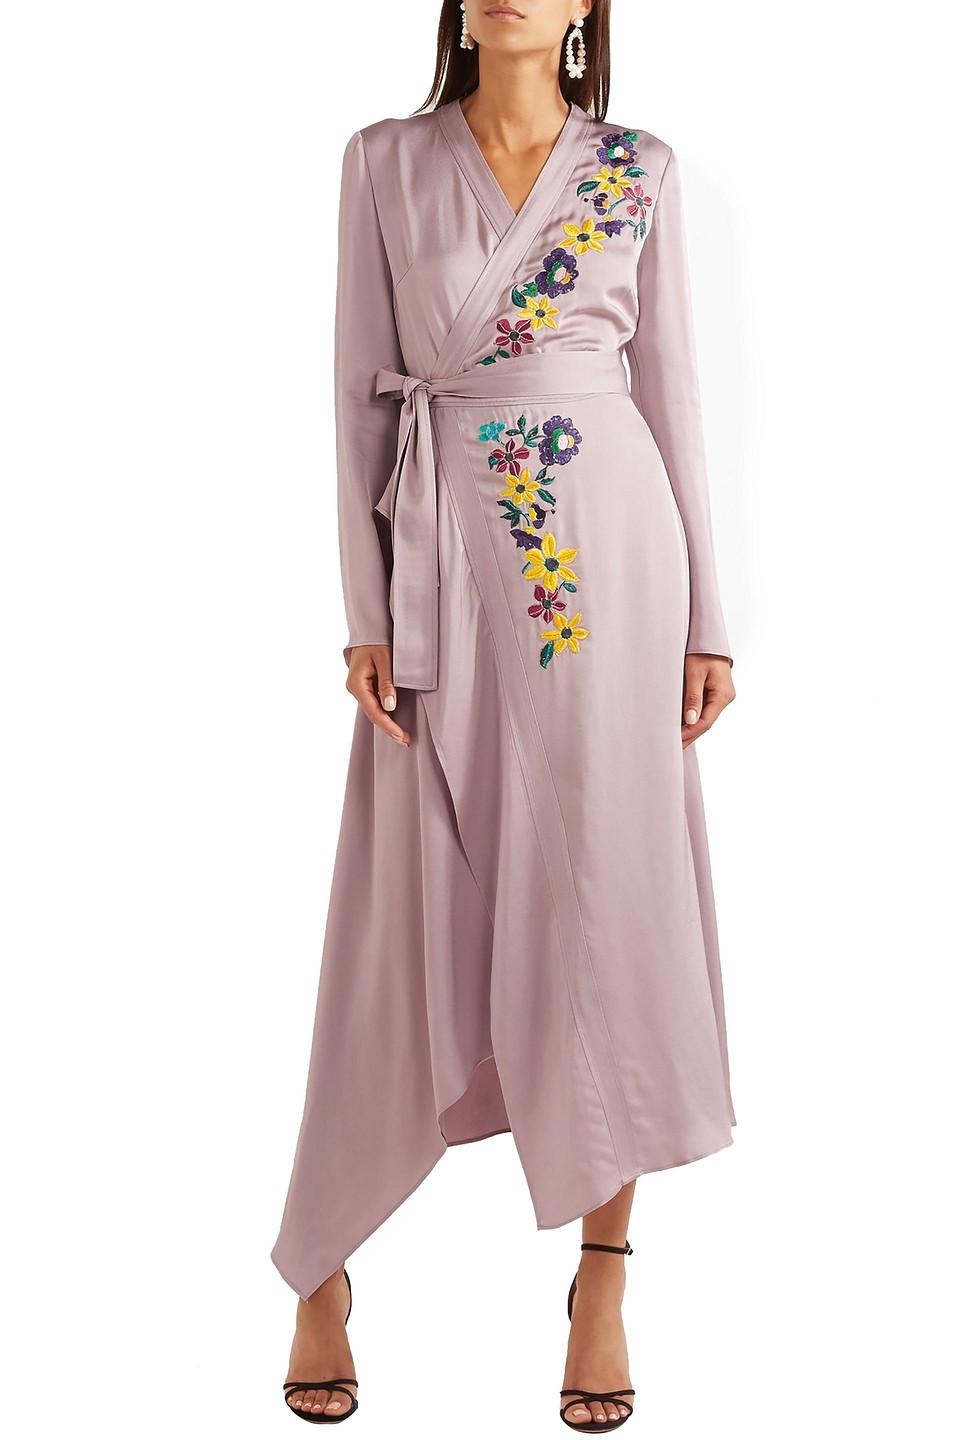 Etro Wrap-effect Embroidered Satin Midi Dress in Lilac (Purple) | Lyst